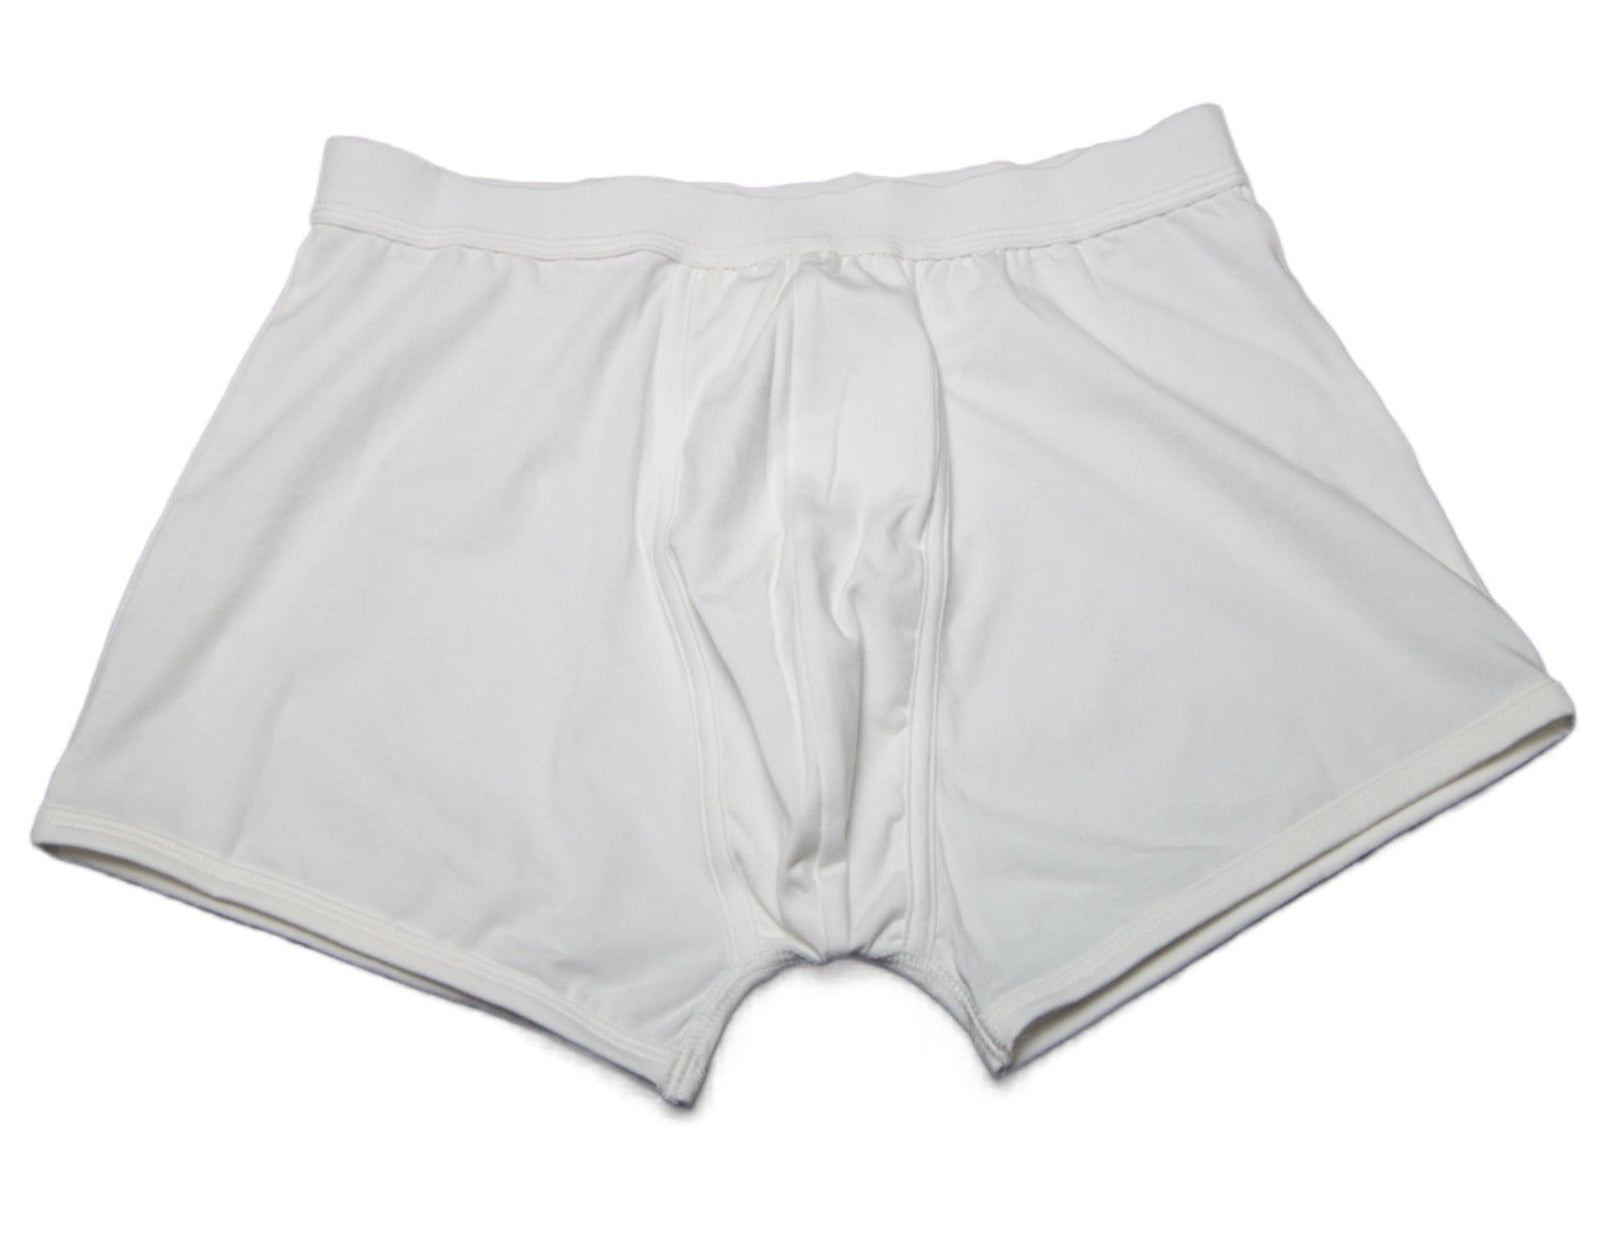 Men's, Trunk Briefs, White, Organic and Fair Trade certified-The Road-stride